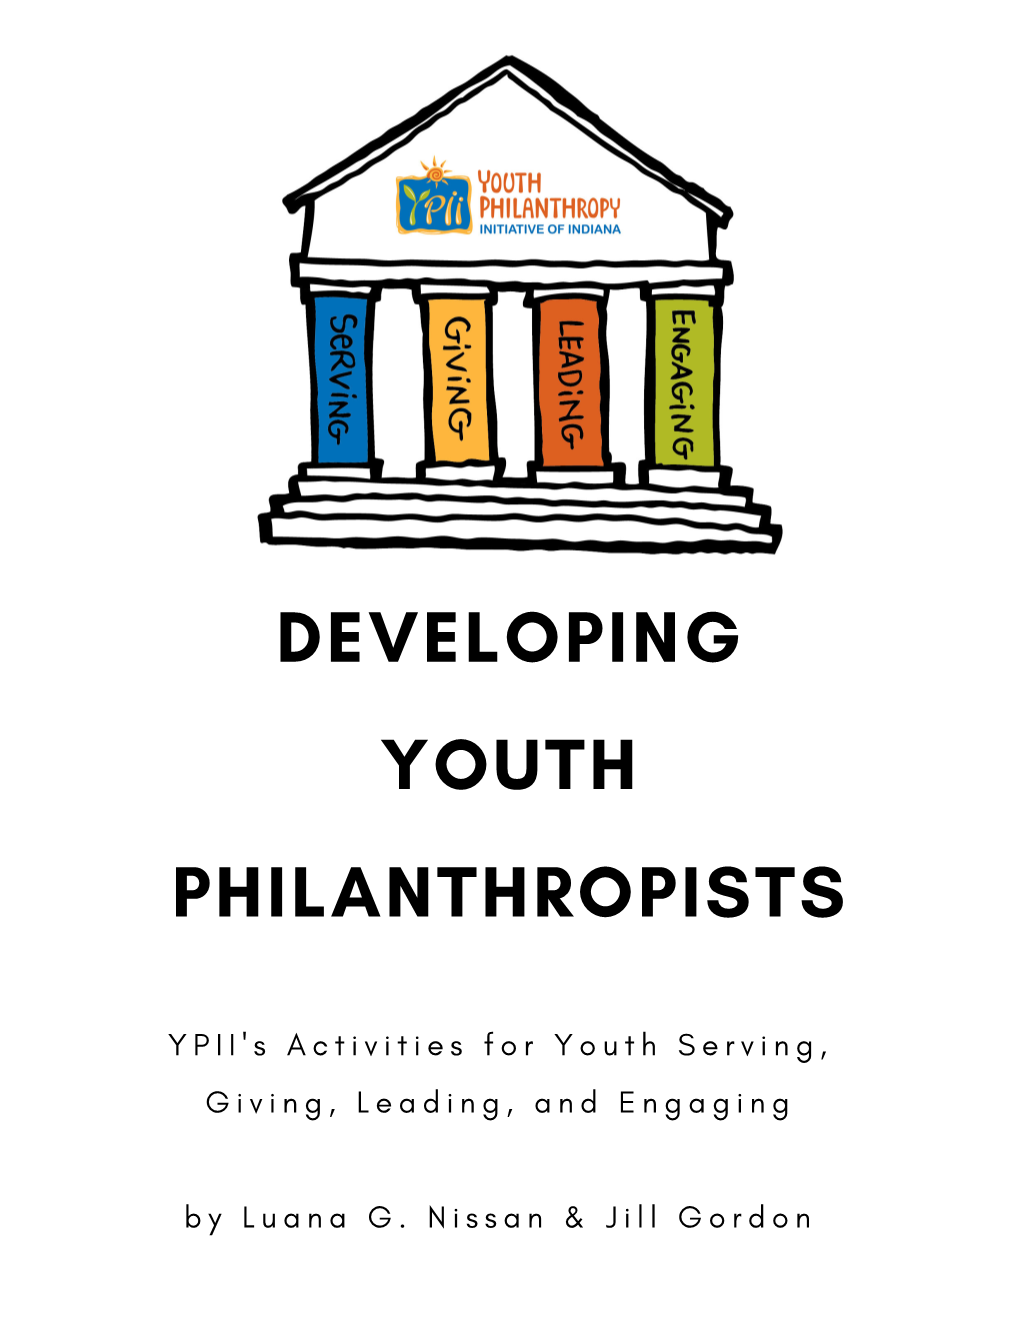 Developing Youth Philanthropists